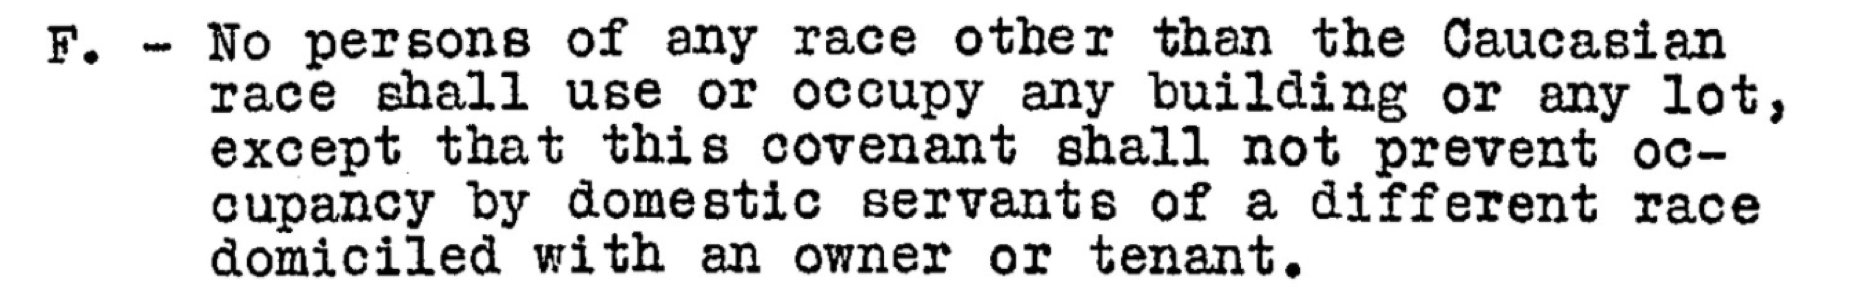 An example of a restrictive covenant: No persons of any race other than the Caucasian race shall use or occupy any building or any lot\, except that this covenant shall not prevent occupancy by domestic servants domiciled with an owner or tenant.